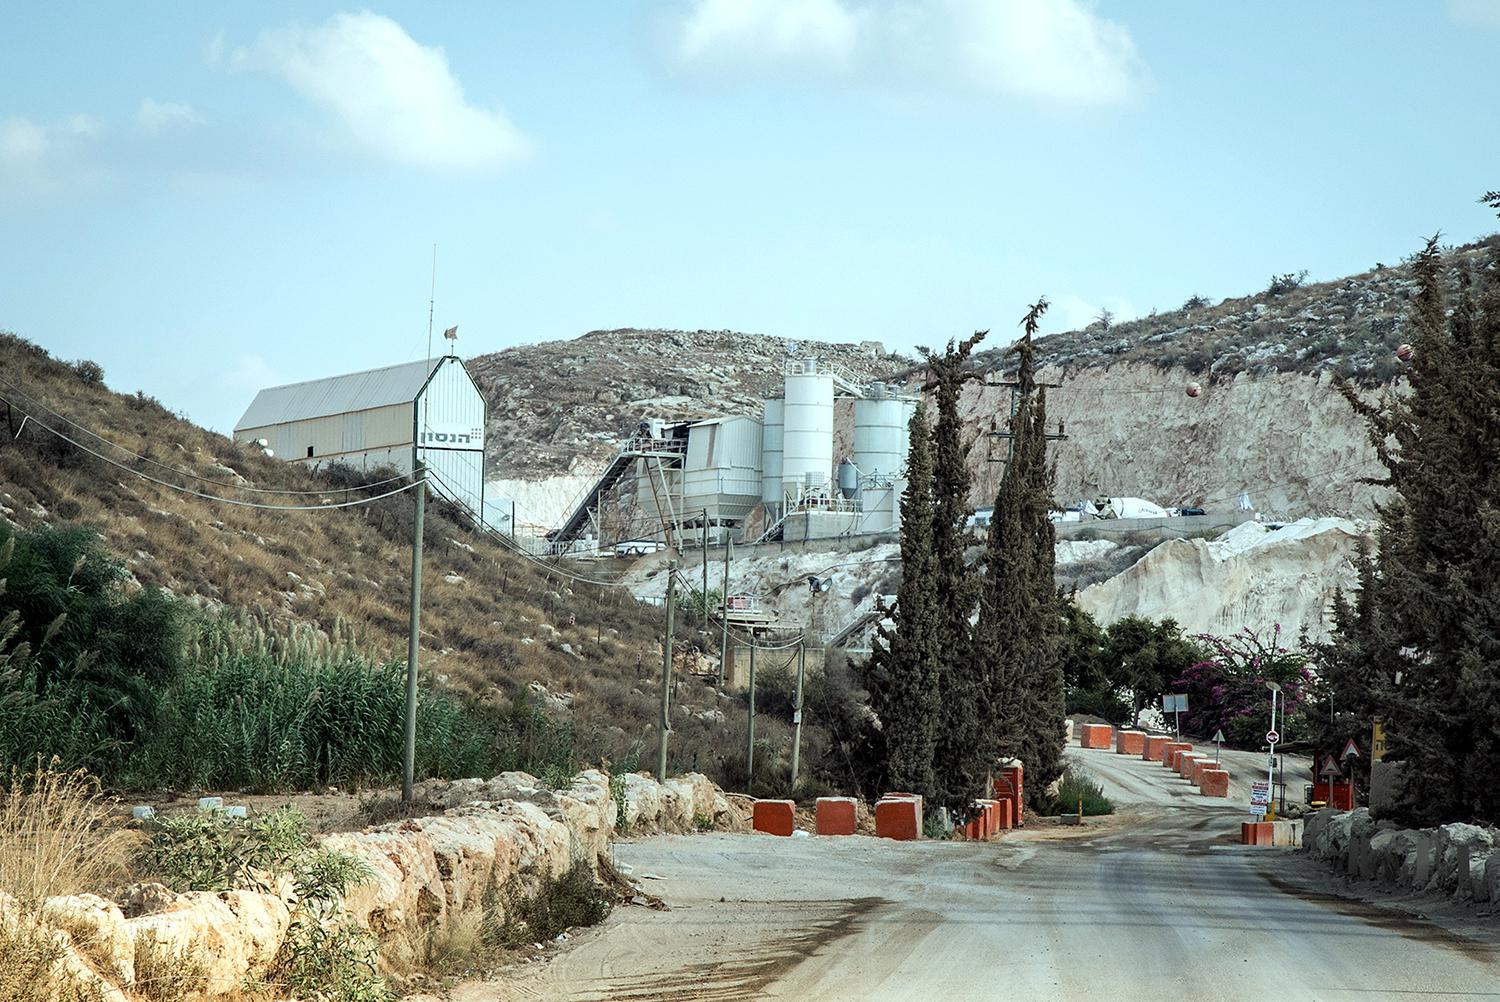 Nahal Rabba quarry, operated by Hanson, a subsidiary of Heidelberg Cement, is one of eleven Israeli- and Internationally-run quarries located in Area C of the West Bank and licensed by the Israeli government. These businesses sell nearly all of the quarri